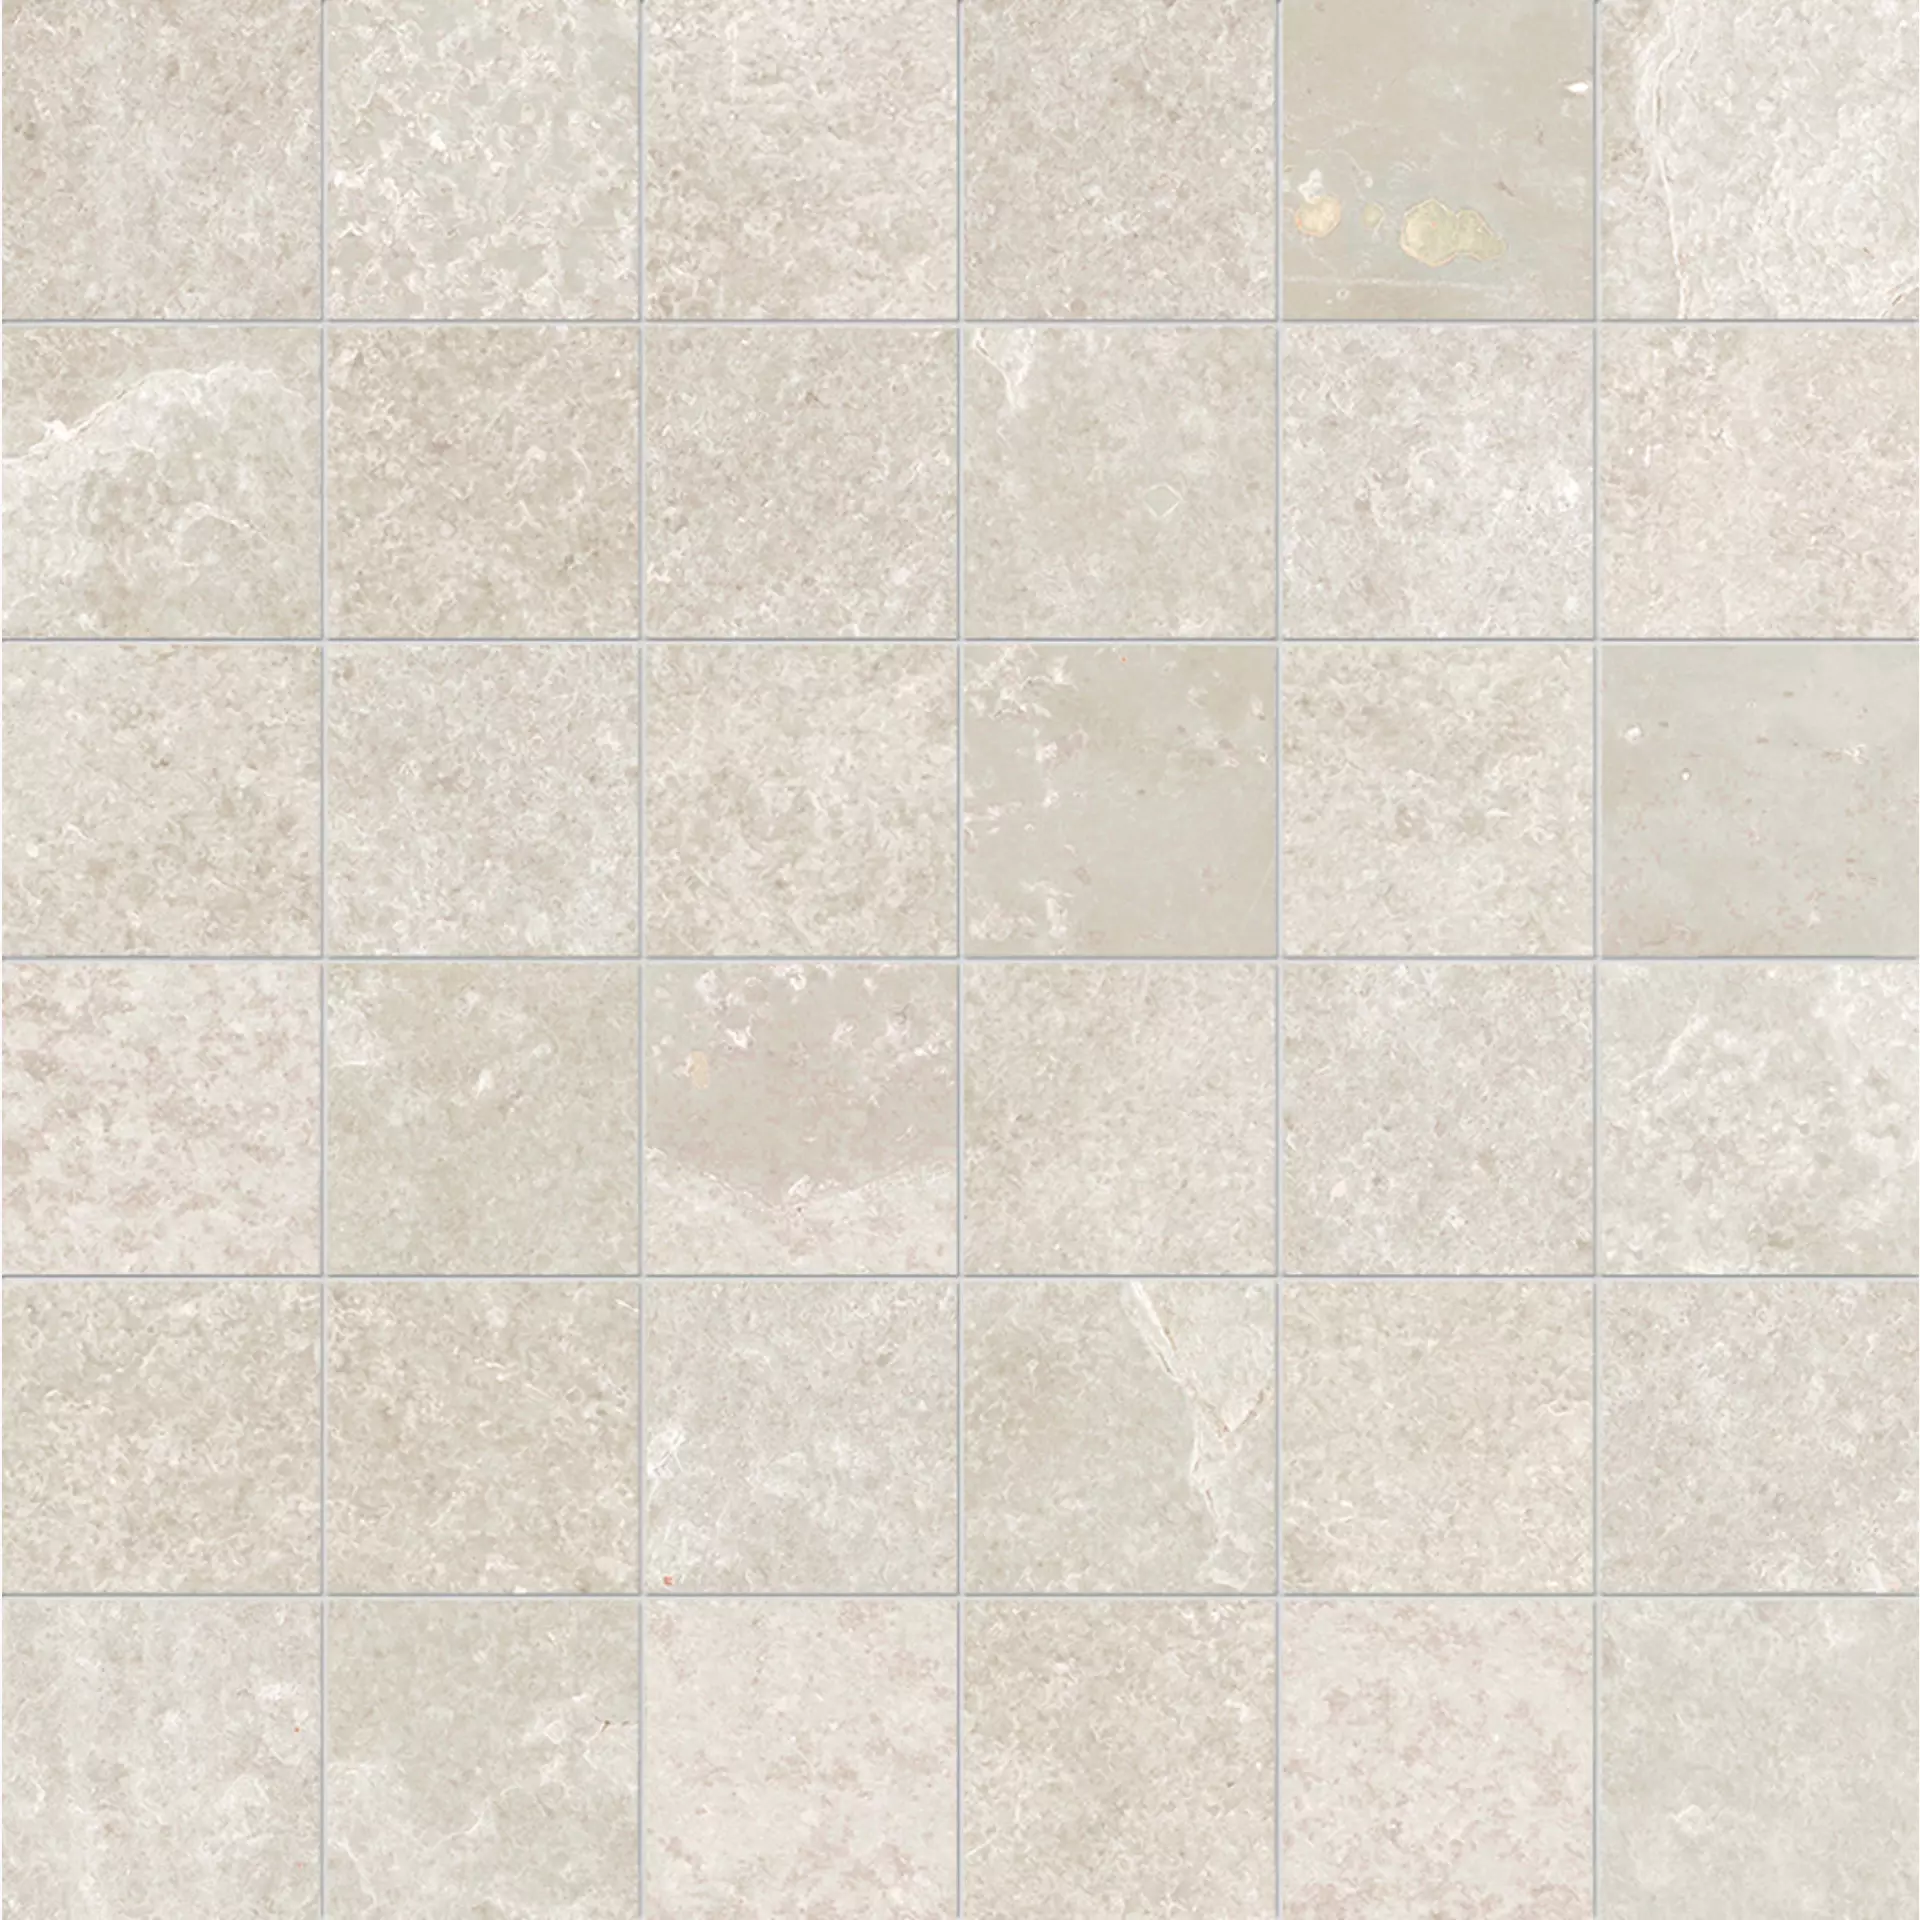 Provenza Groove Hot White Naturale Mosaic 5x5 E3FR 30x30cm rectified 9,5mm